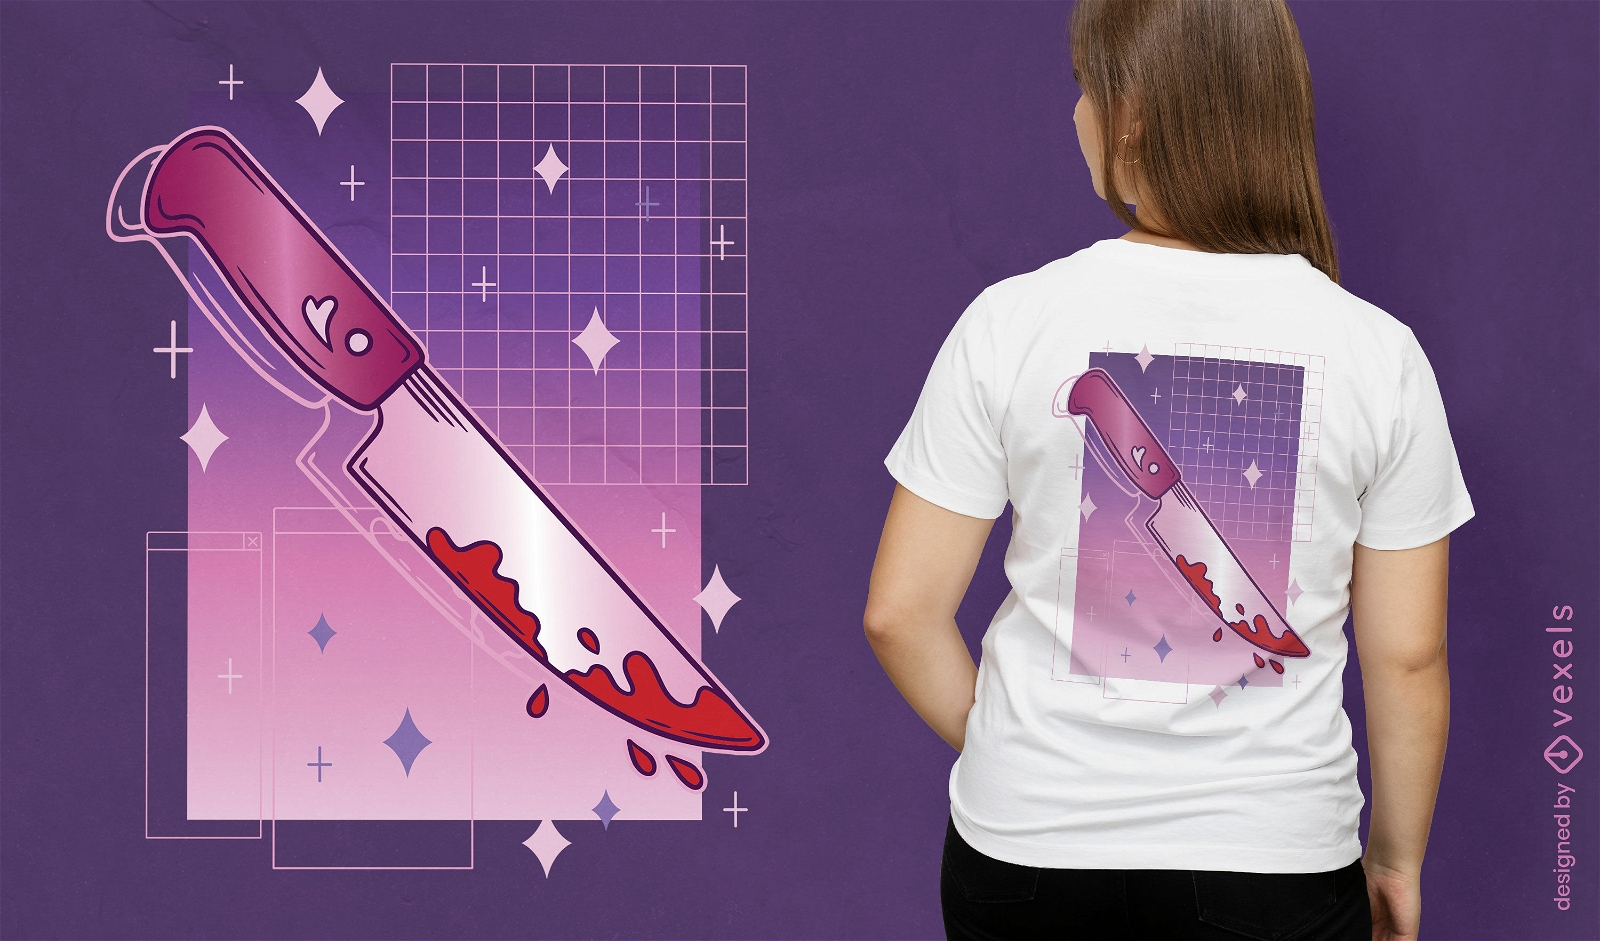 Trendy Pink Knife With Drops Of Blood Trendy Illustration In Style